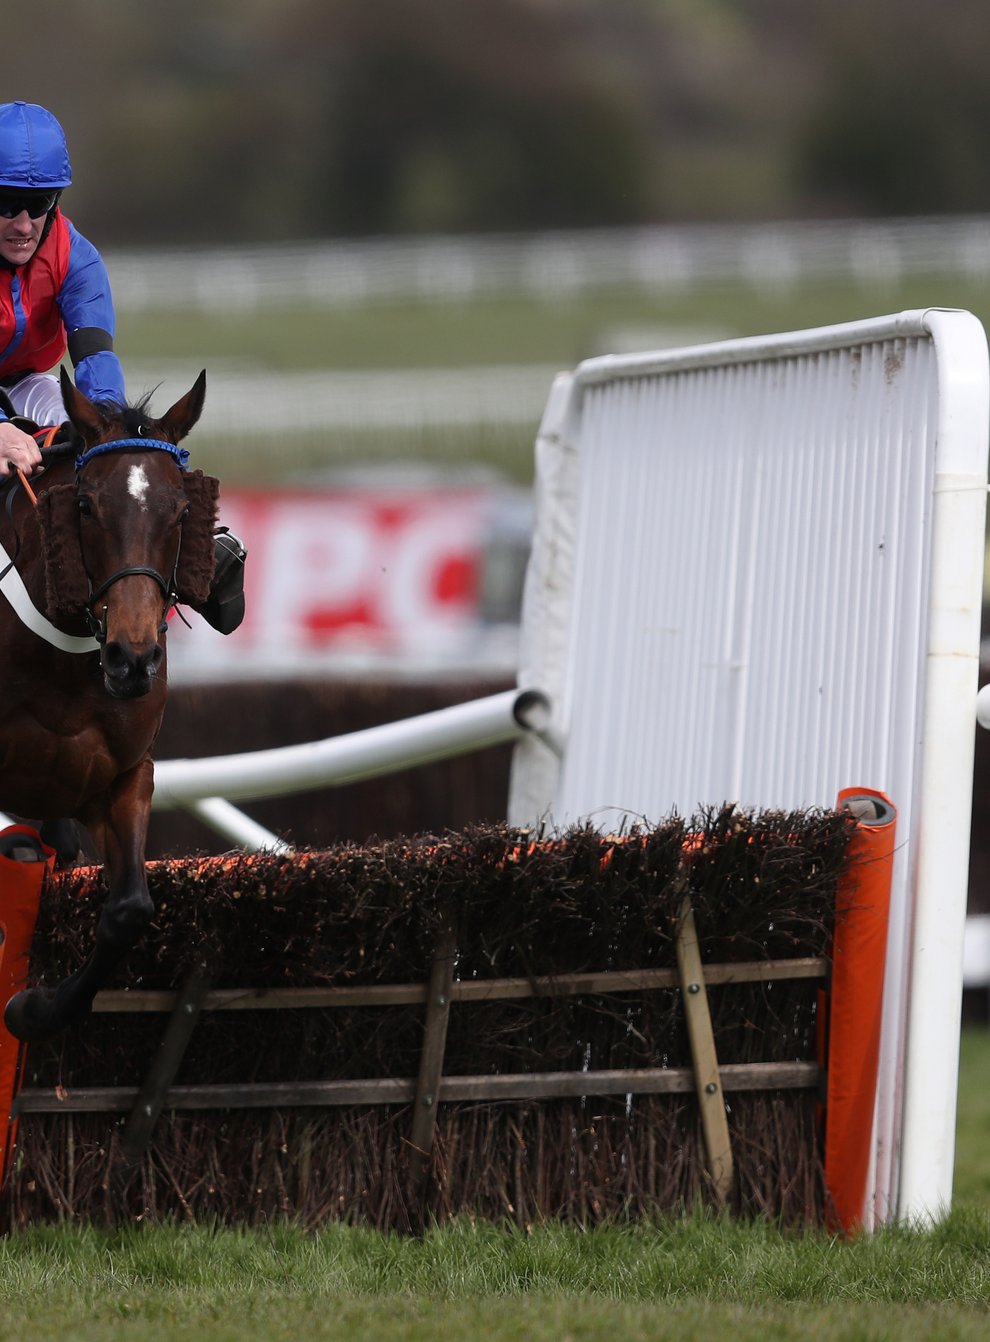 Bannixtown Glory and Brian Hughes coming home to win the Citipost Mares’ Handicap Hurdle at Cheltenham